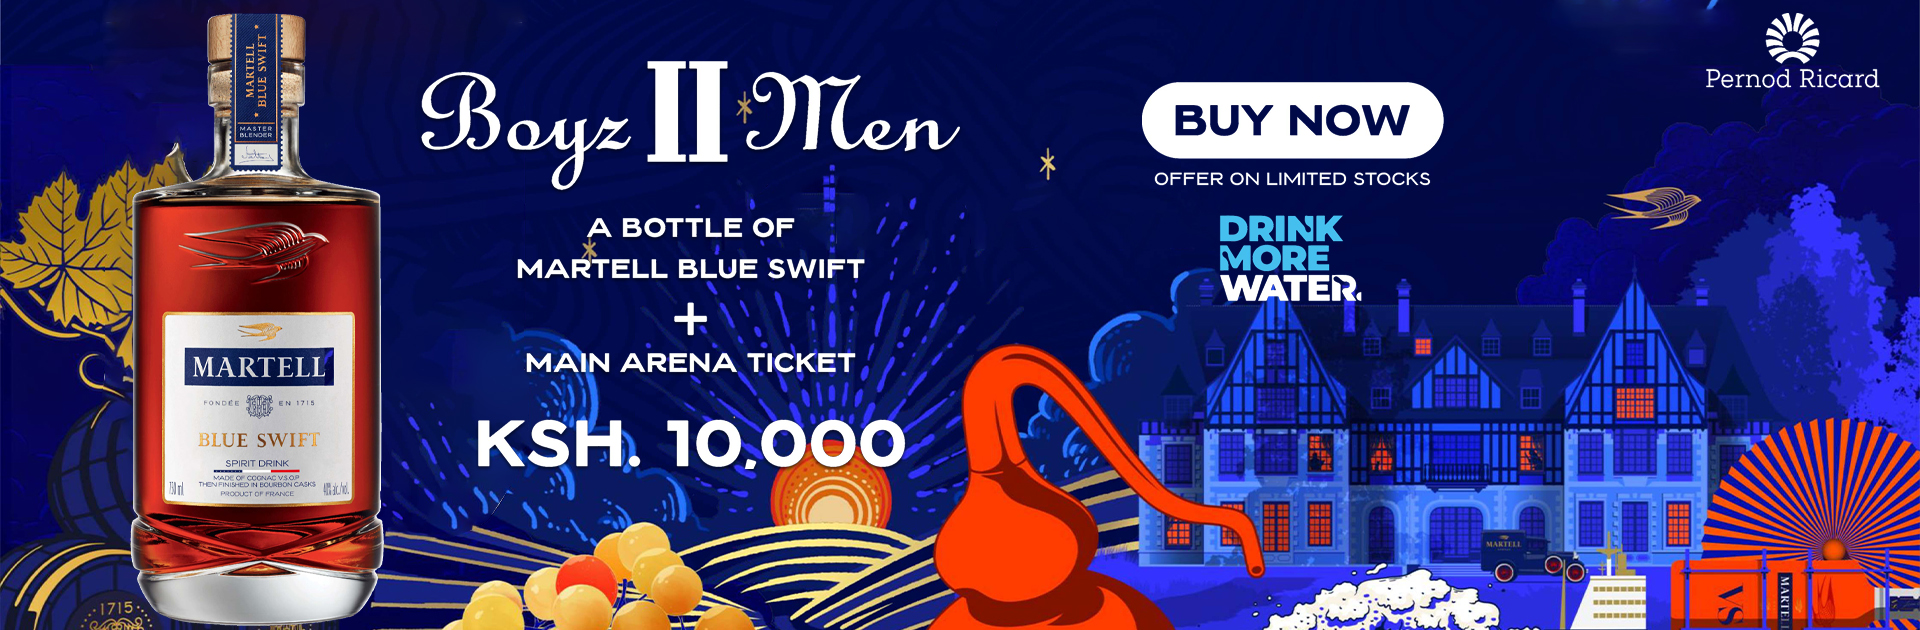 Boys 2 Men Free Ticket with Martell alcohol delivery